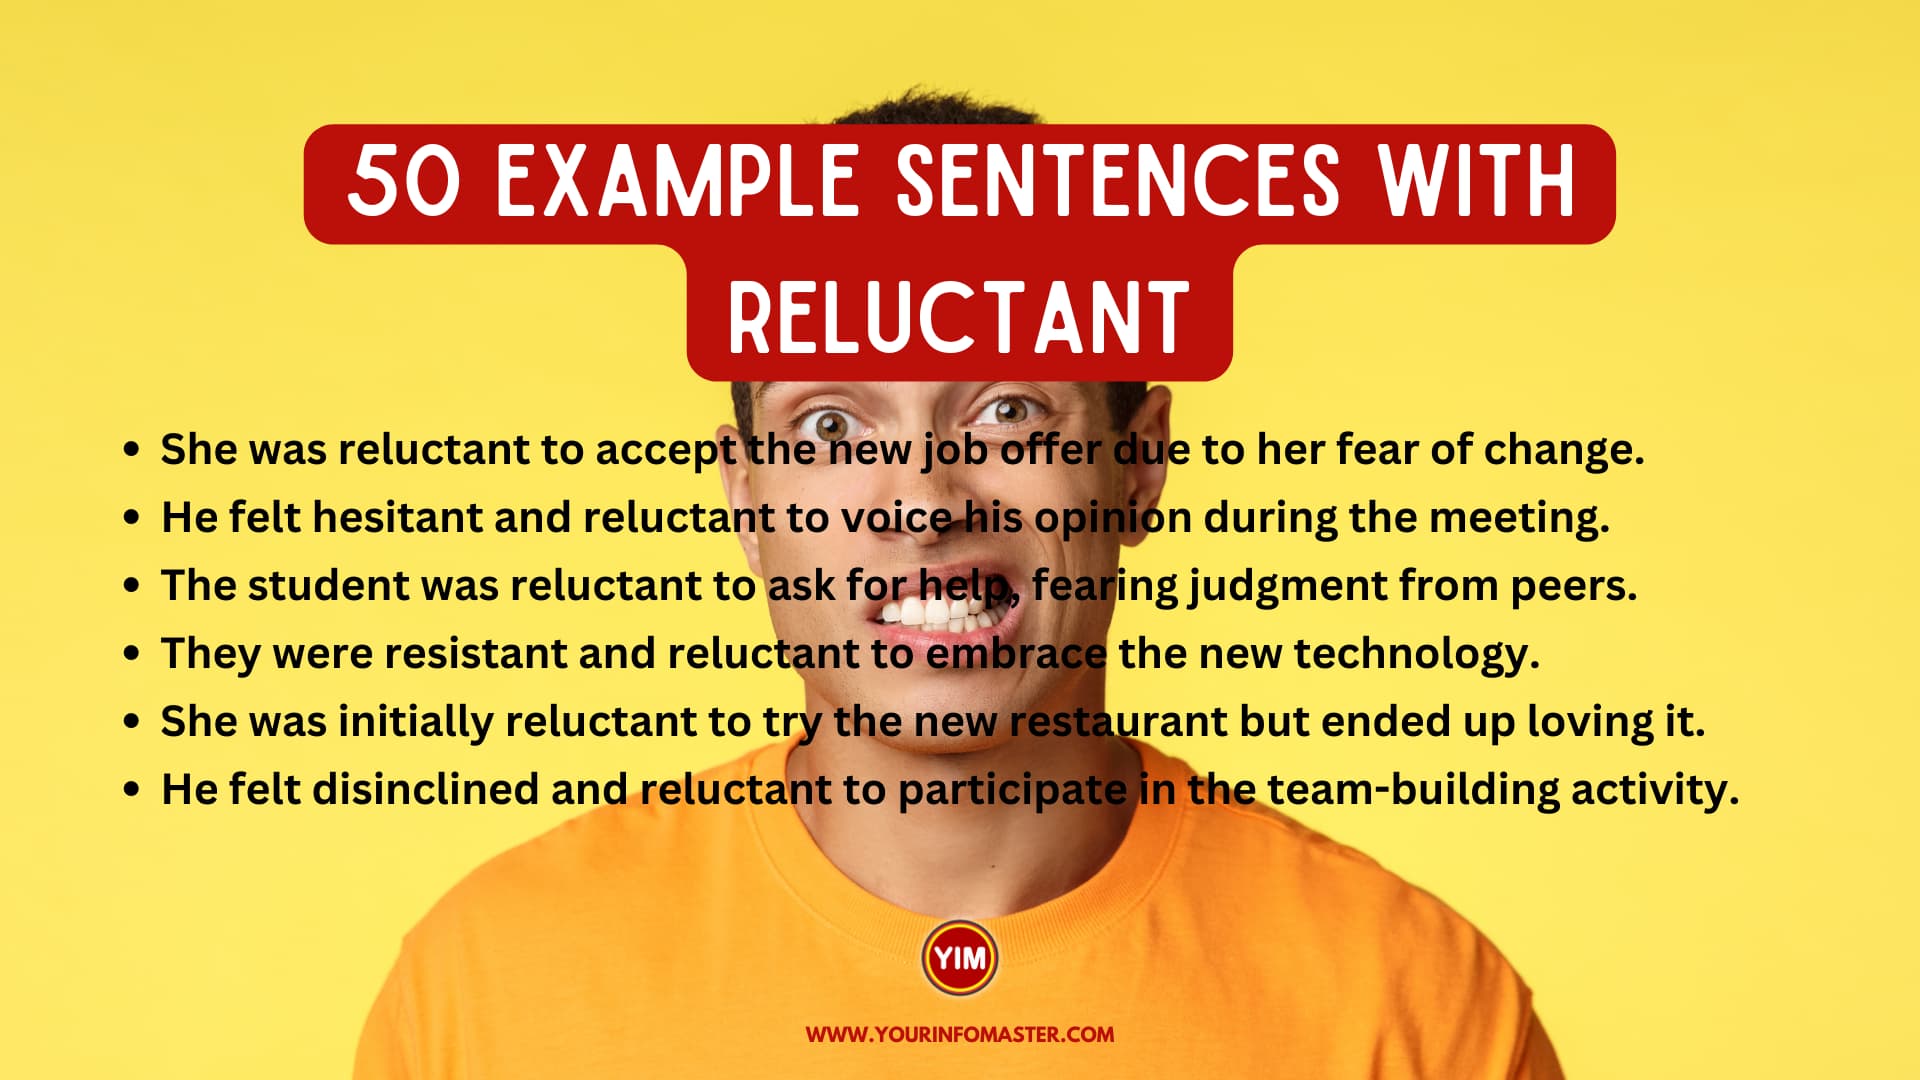 50 Sentences with Reluctant